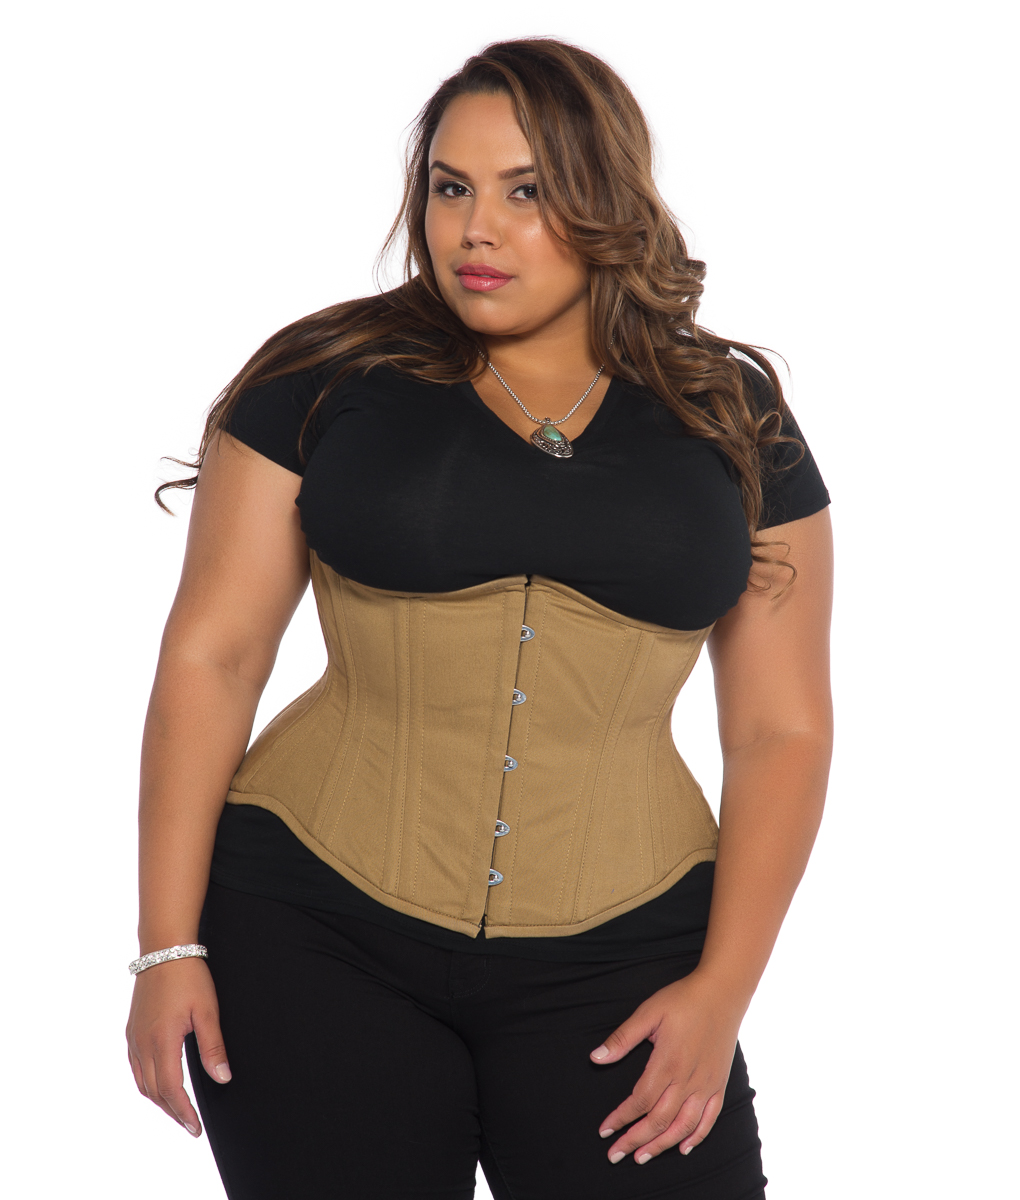 Our Underbust Plus Size Corset Are Here at Low Price